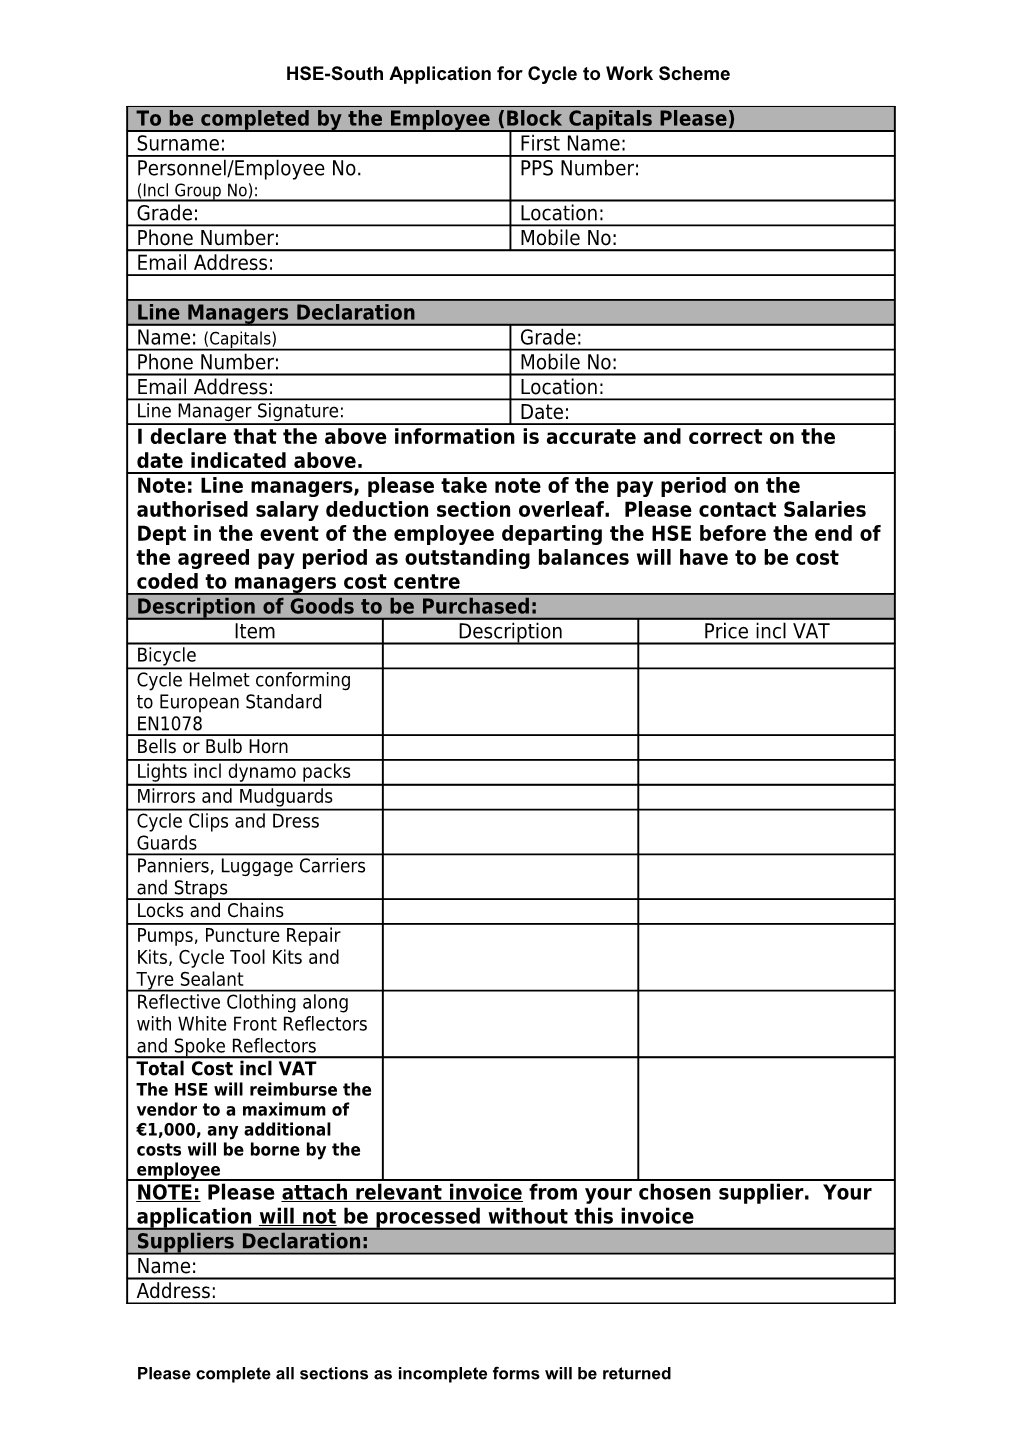 HSE-South Application for Cycle to Work Scheme 2012